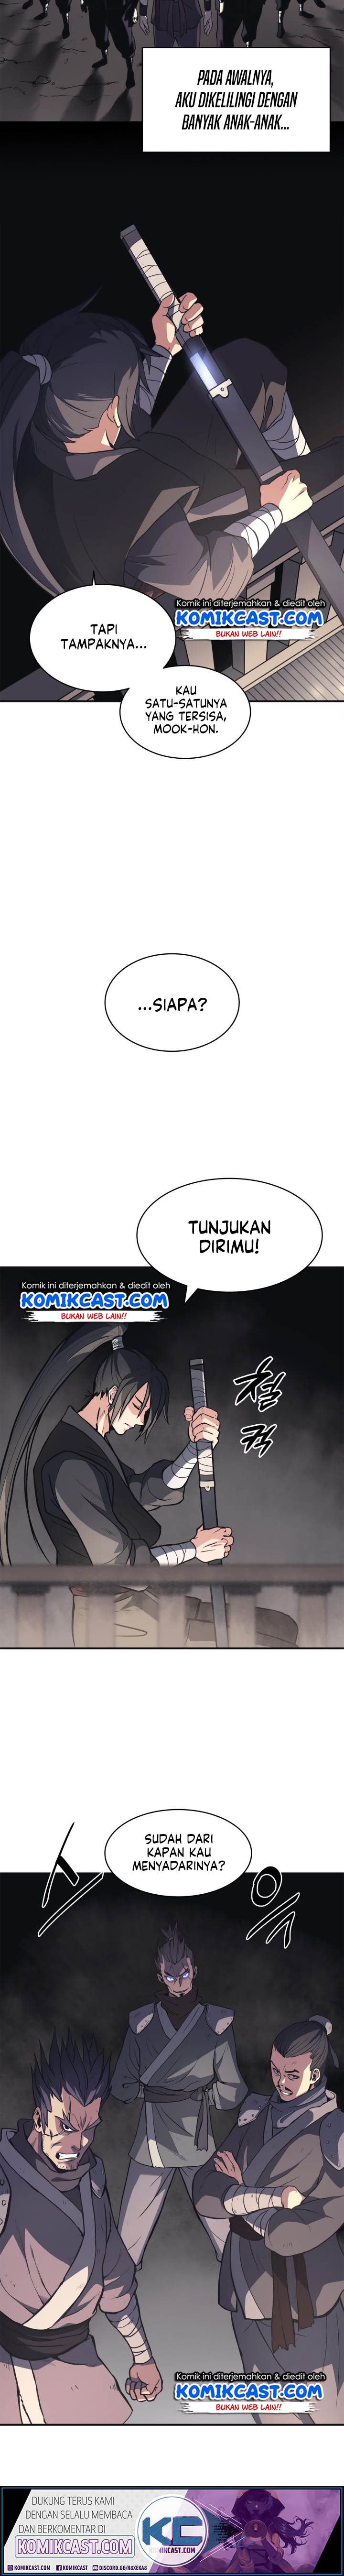 Mookhyang The Origin Chapter 01 14